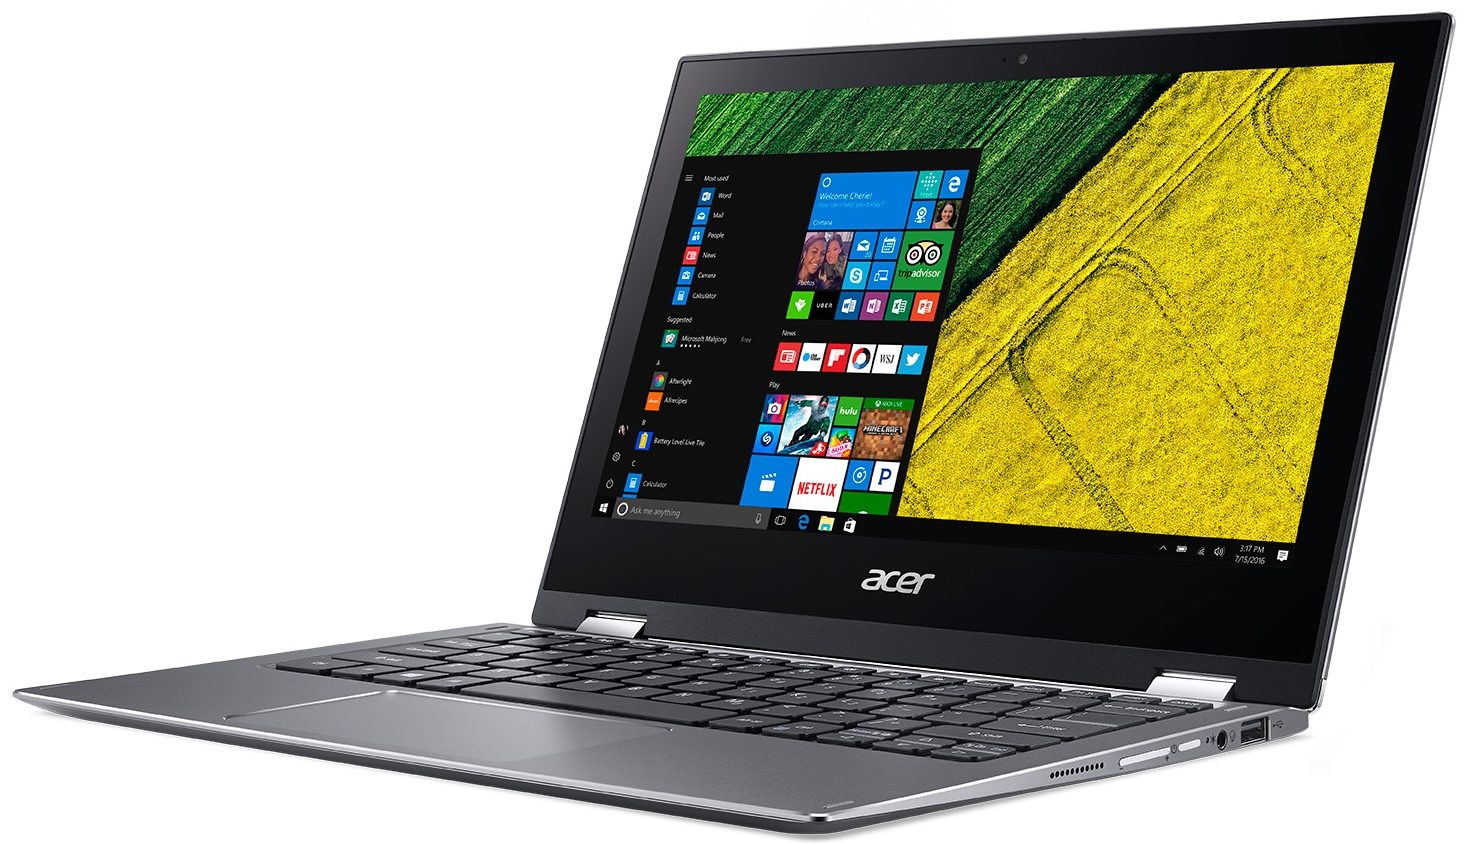 Acer spin sp111 32n. Ноутбук Acer Spin 1 sp111-34n. Aspire 8. CER Swift 3 sf315-51 n17p4. Acer Niro 5 an515-51.